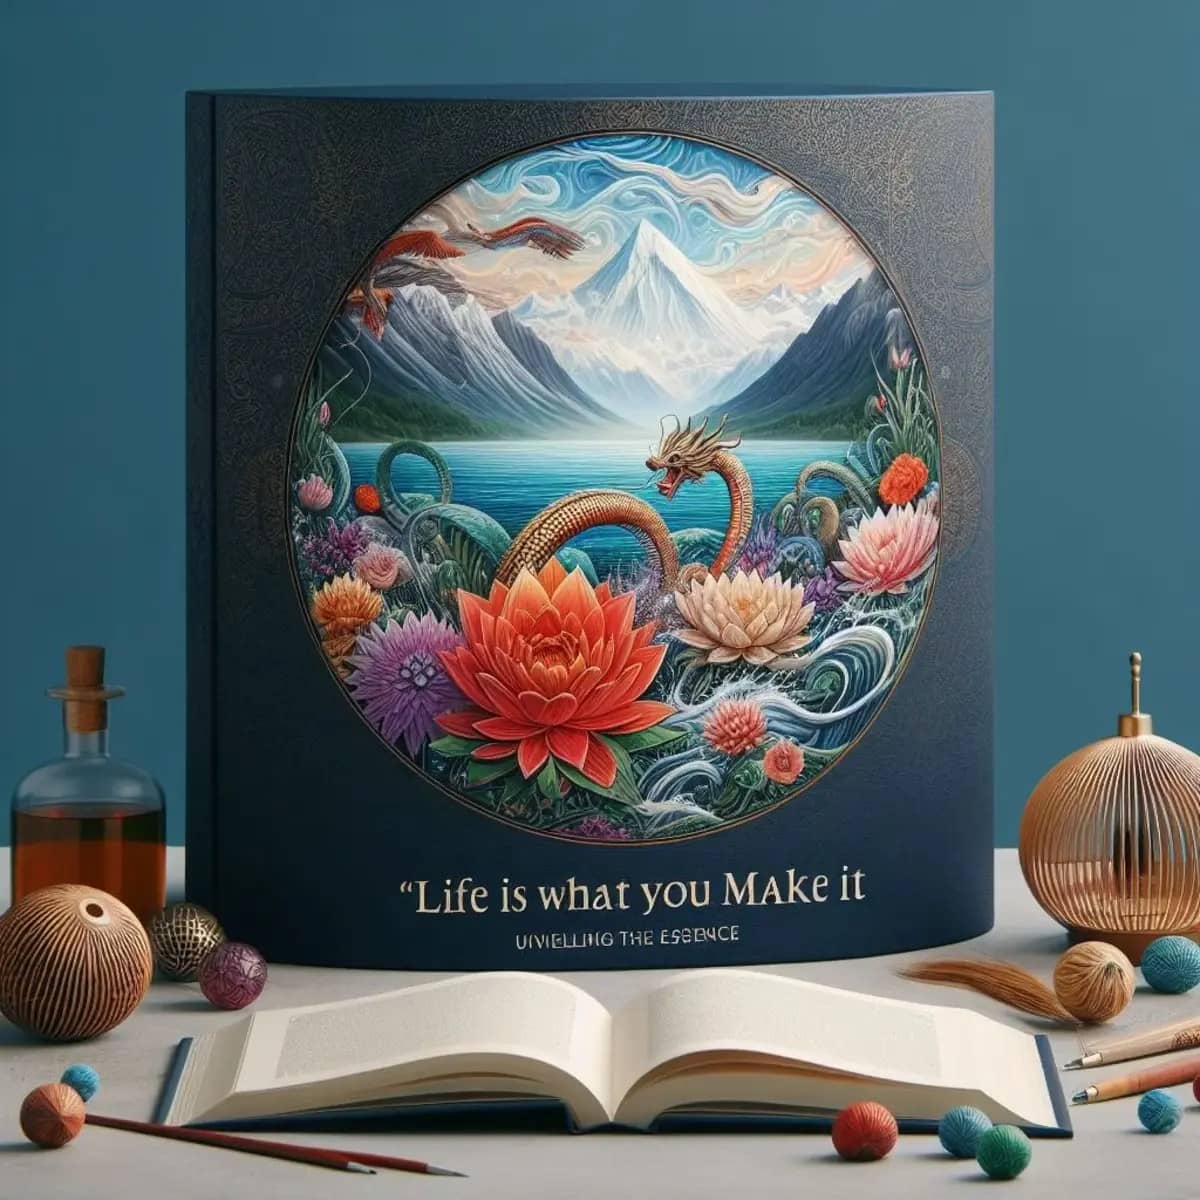 Unlocking Life's Secrets: A Comprehensive Summary of "Life Is What You Make It"